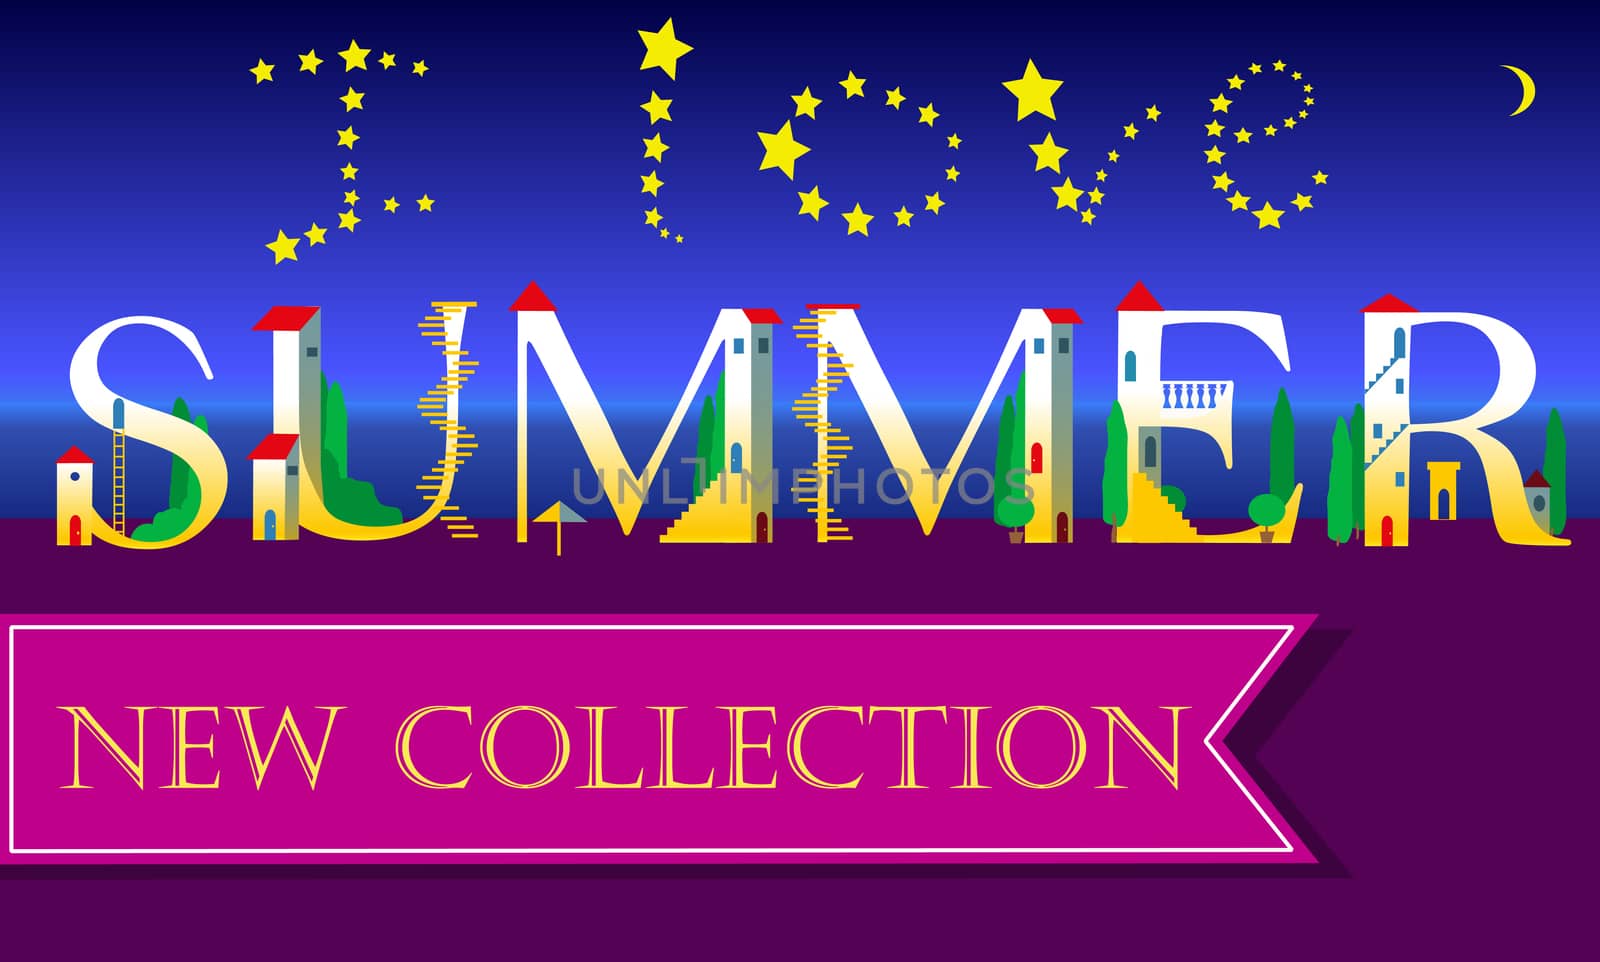 I love Summer. New Collection. Inscription. Holiday houses Font.  Illustration